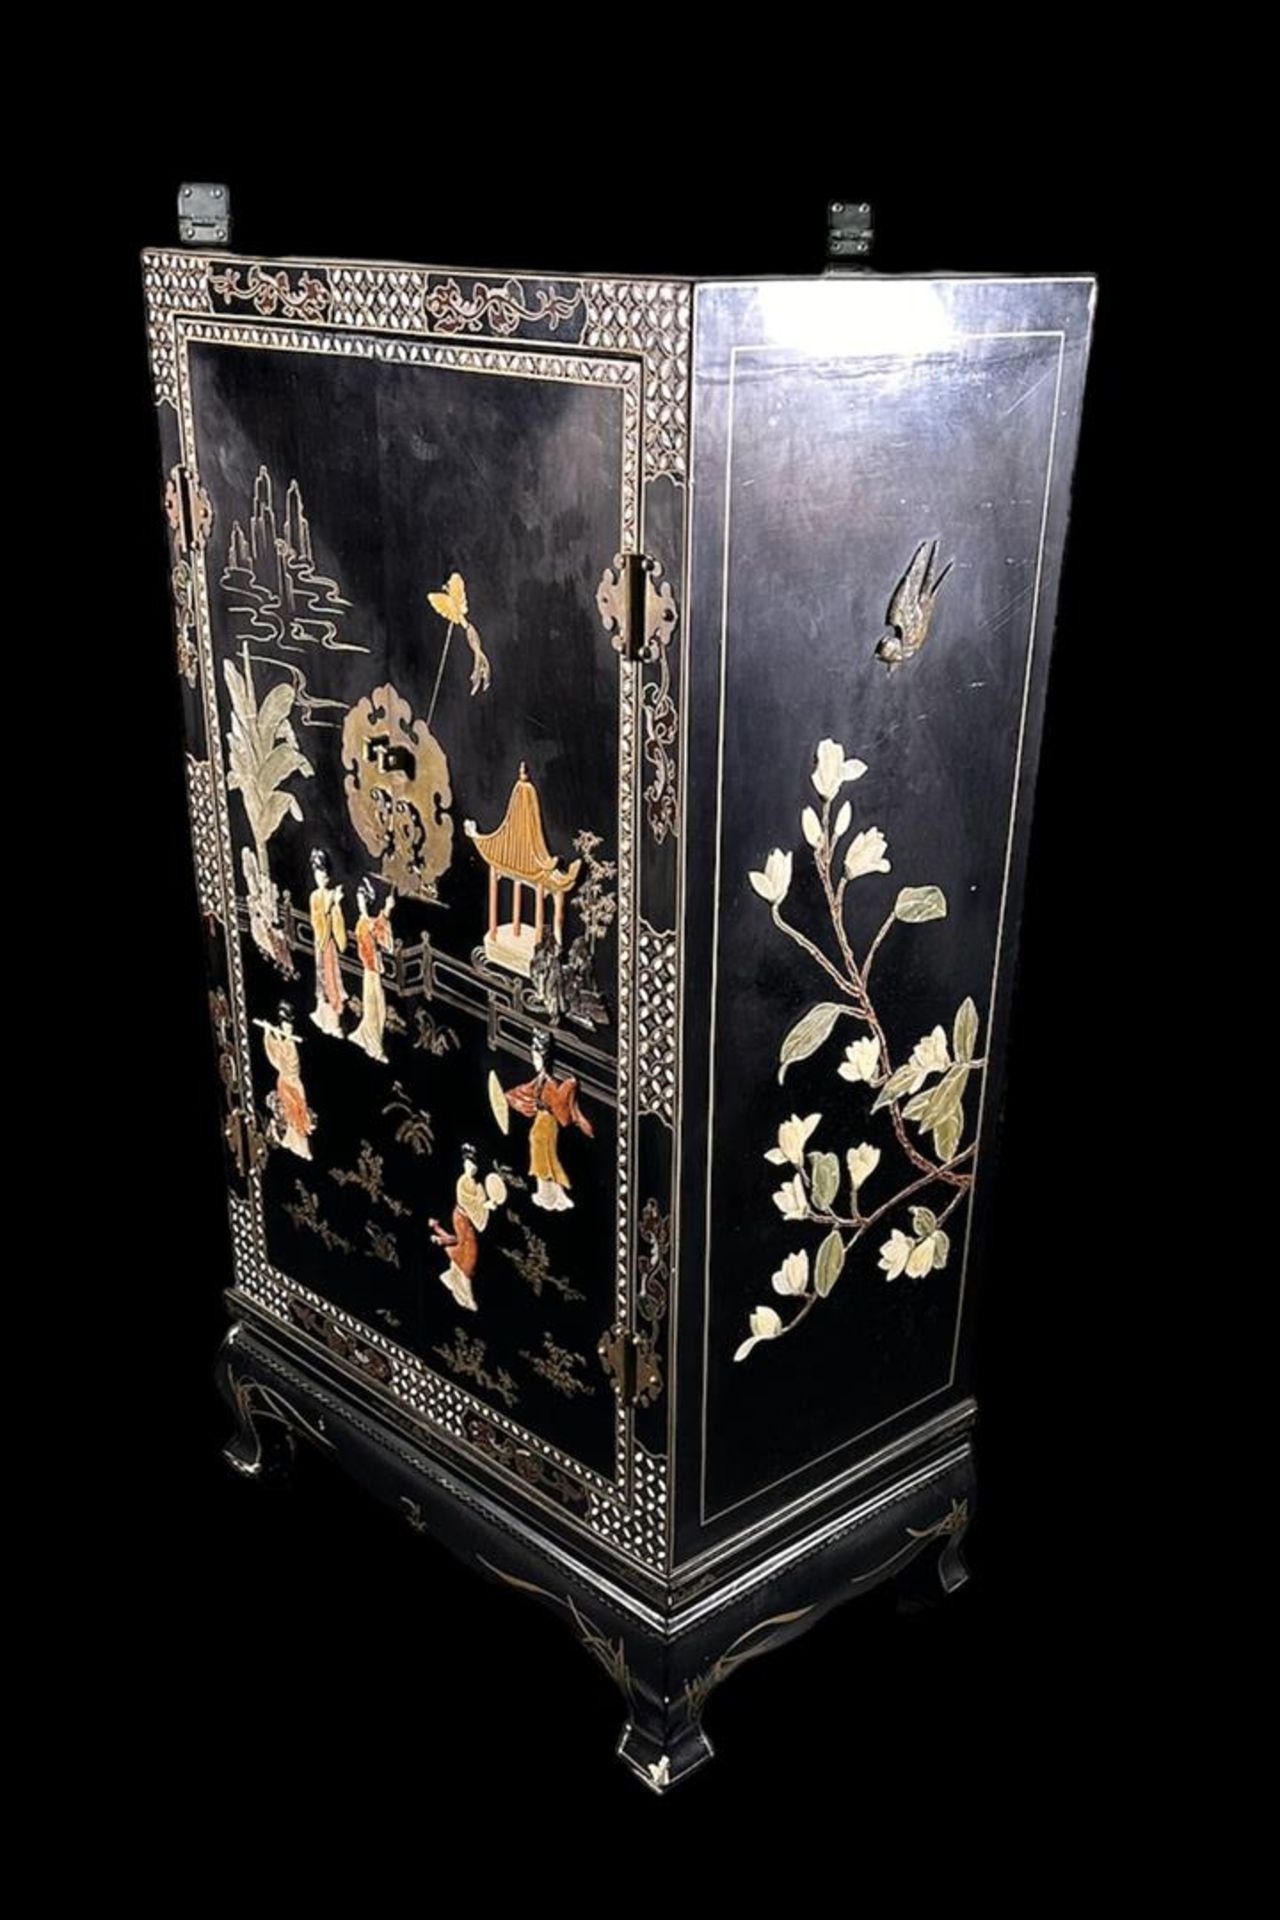 A black Chinese cabinet decorated with figures and court scenes in carved stone.
120 x 45 x 102 cm. - Image 2 of 2